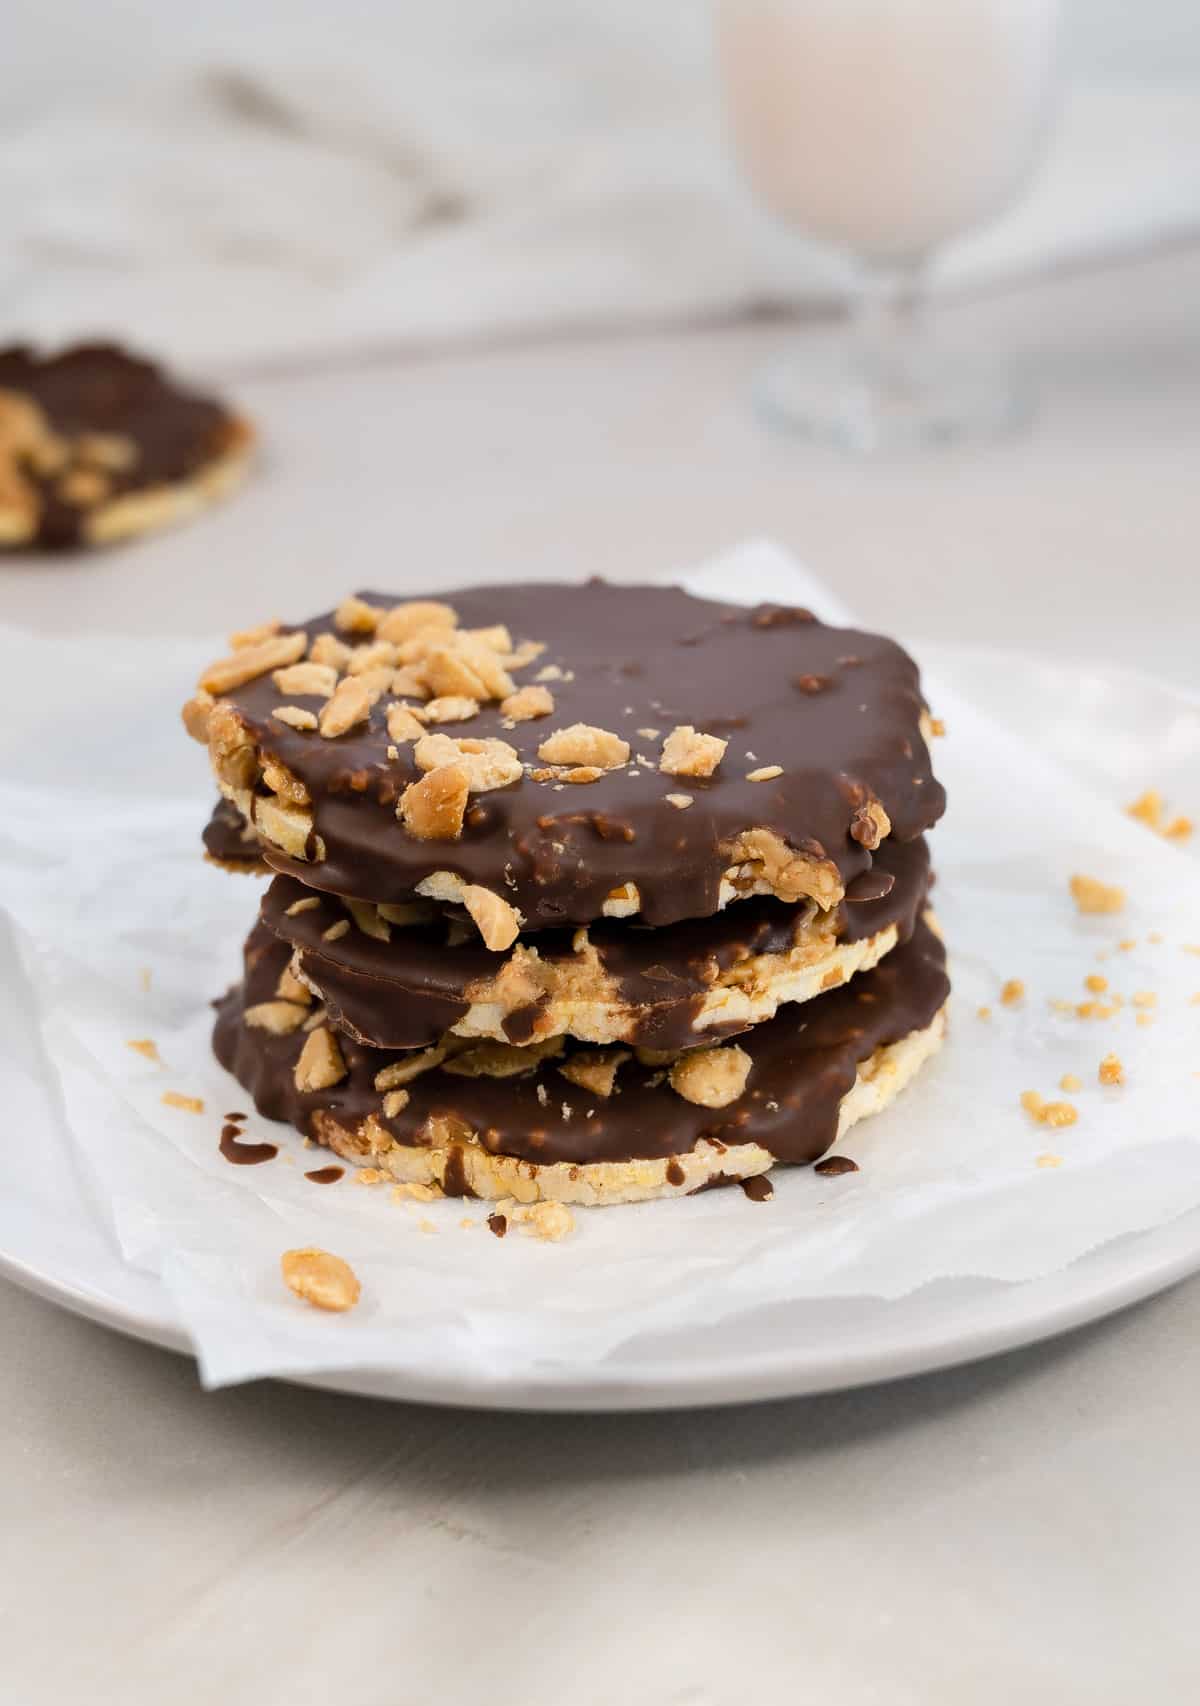 a stack of 3 chocolate and peanut butter covered rice cakes on a white plate